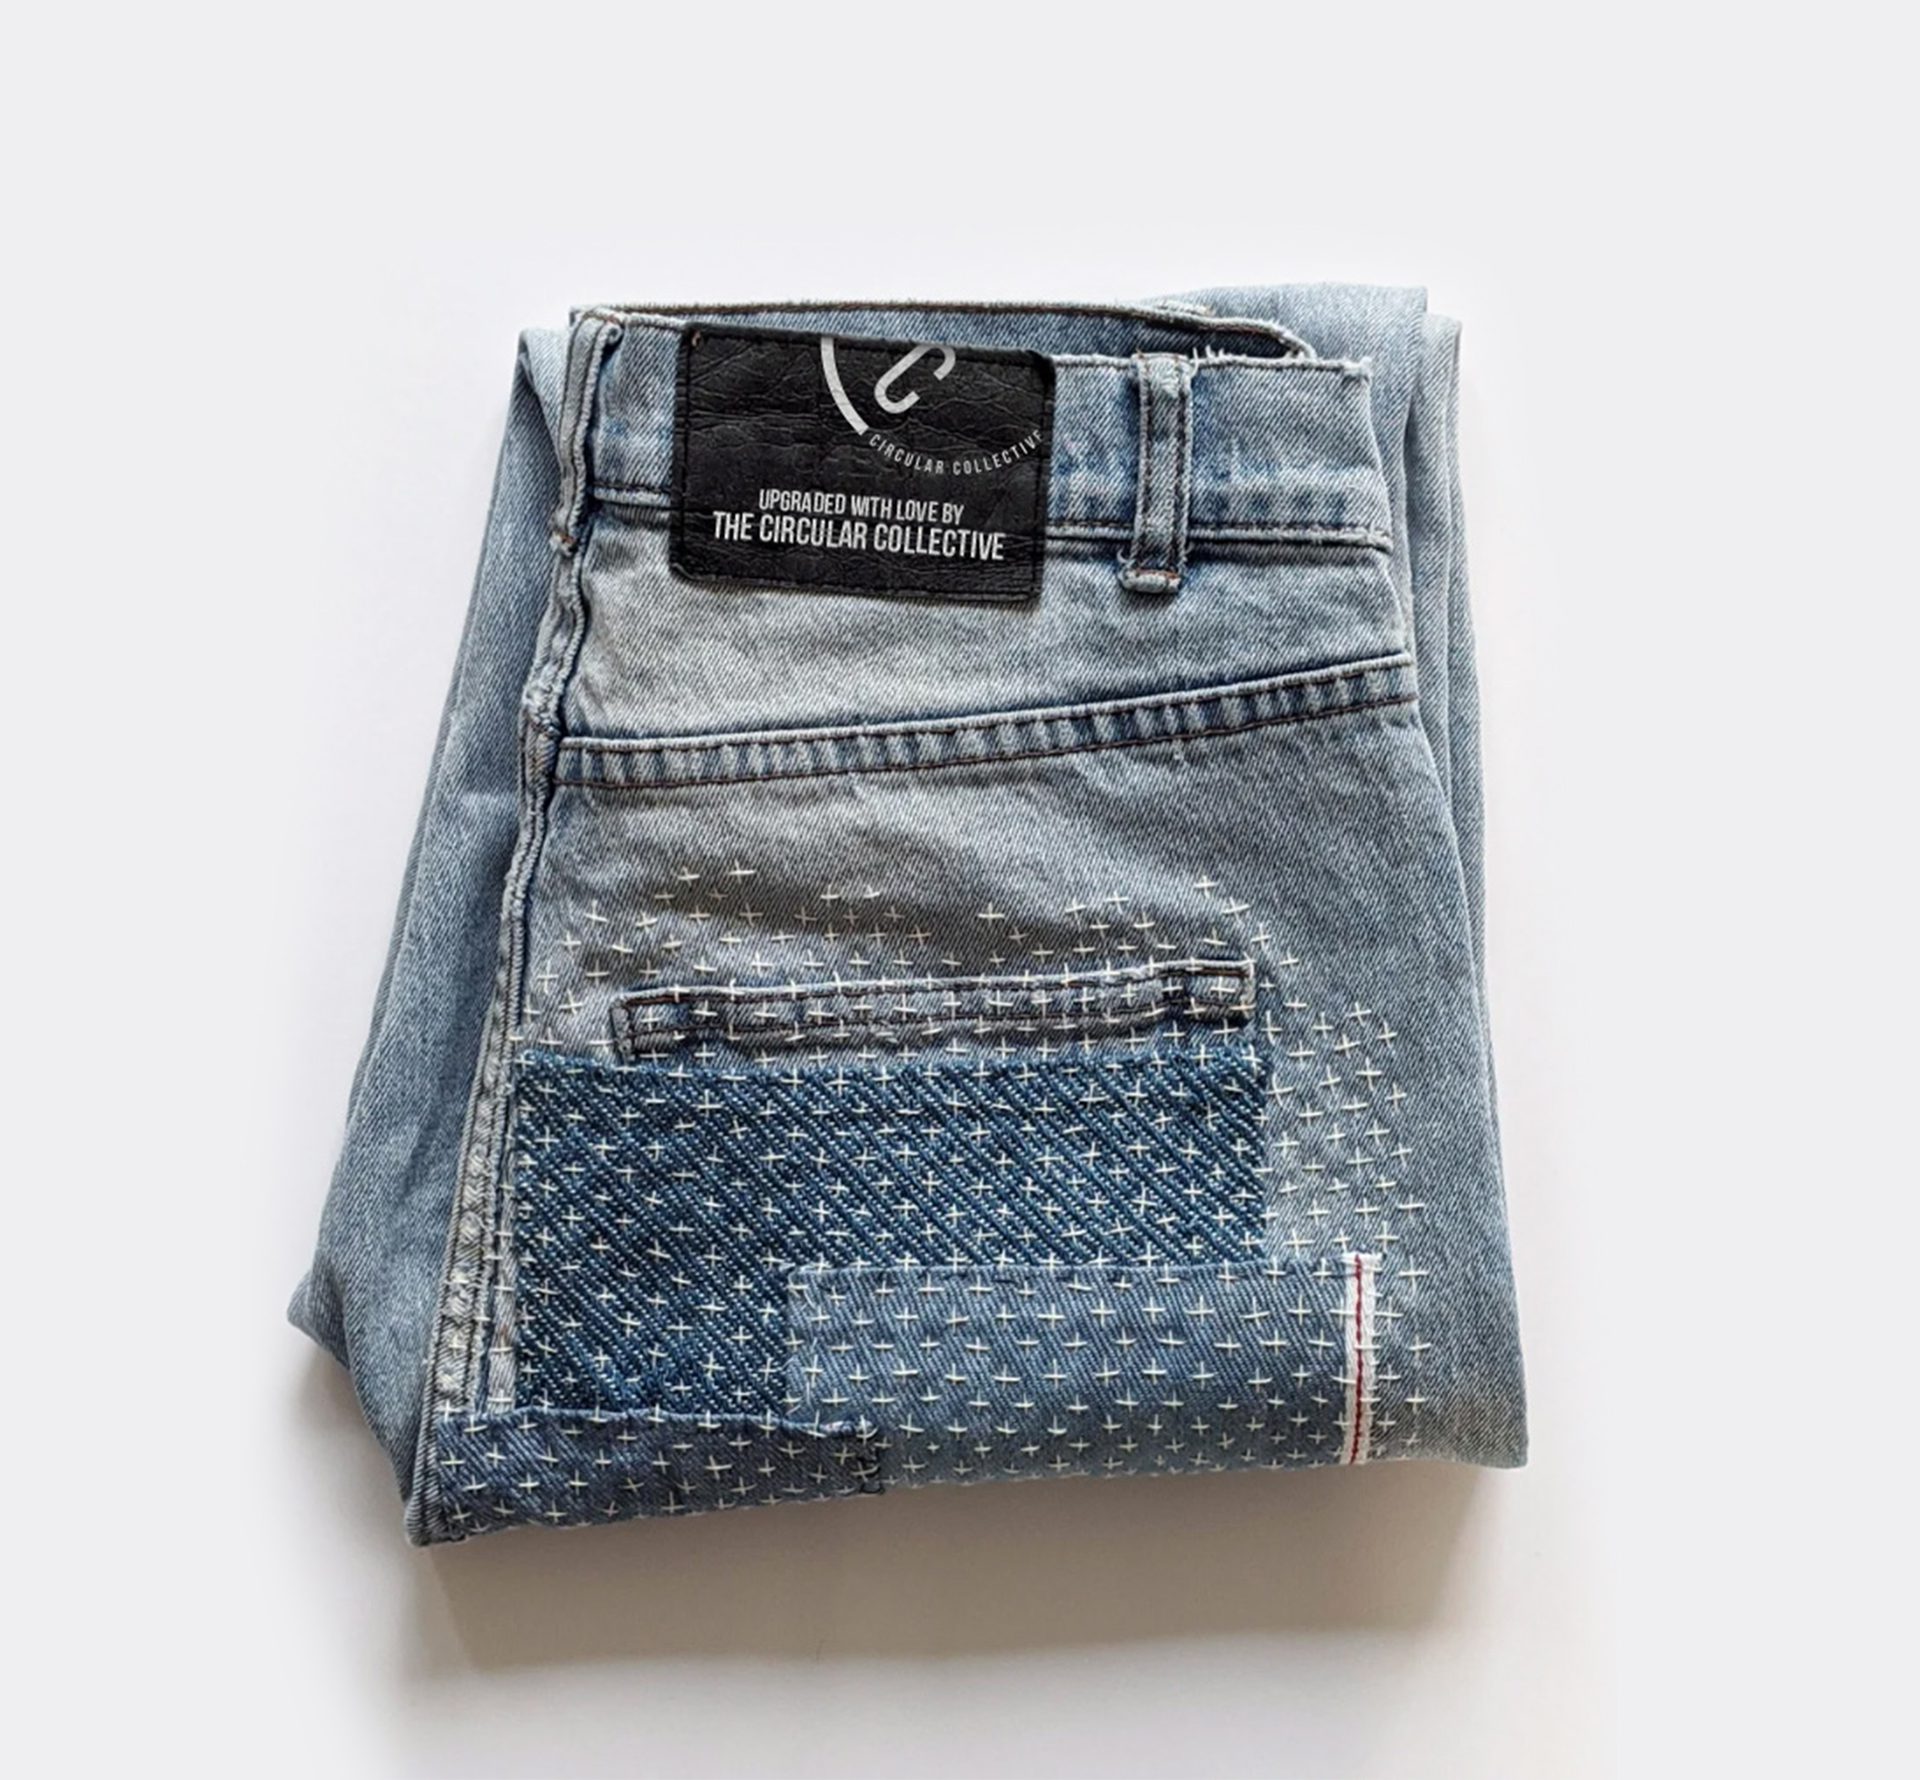 an image of a folded pair of preloved, customedised jeans with the Circular Collective brand